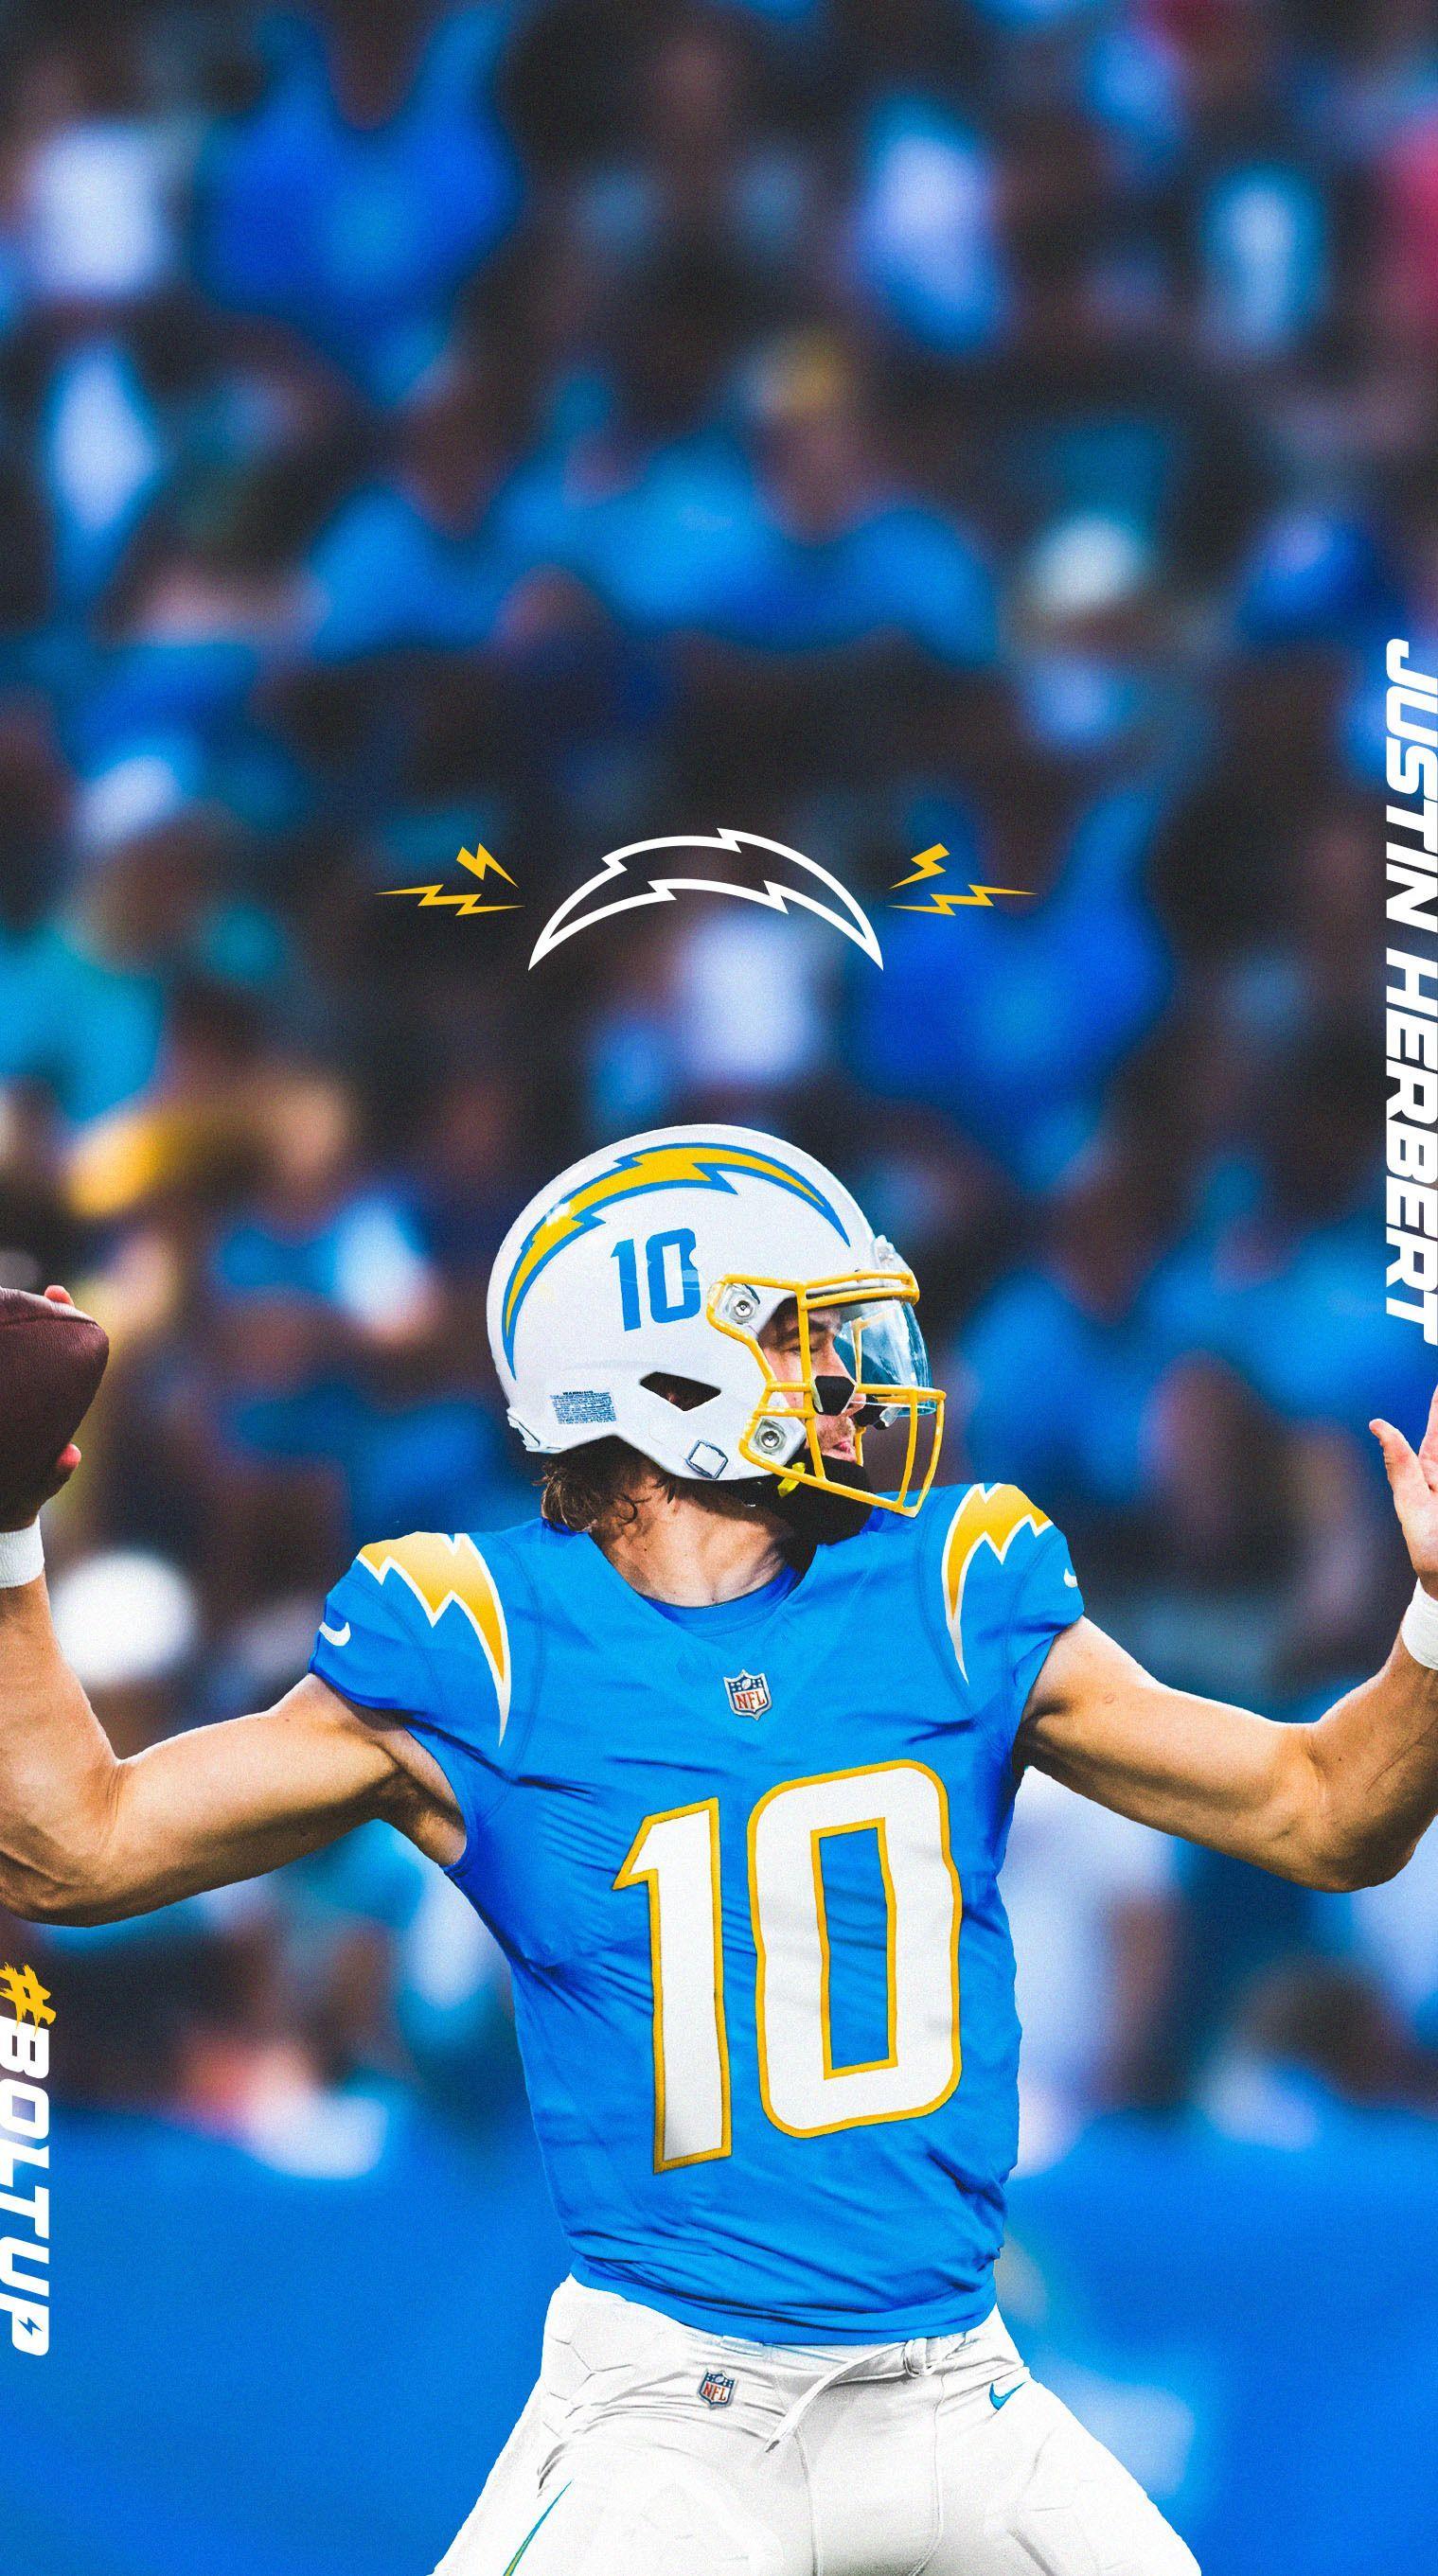 Los Angeles Chargers Wallpapers  Wallpaper Cave